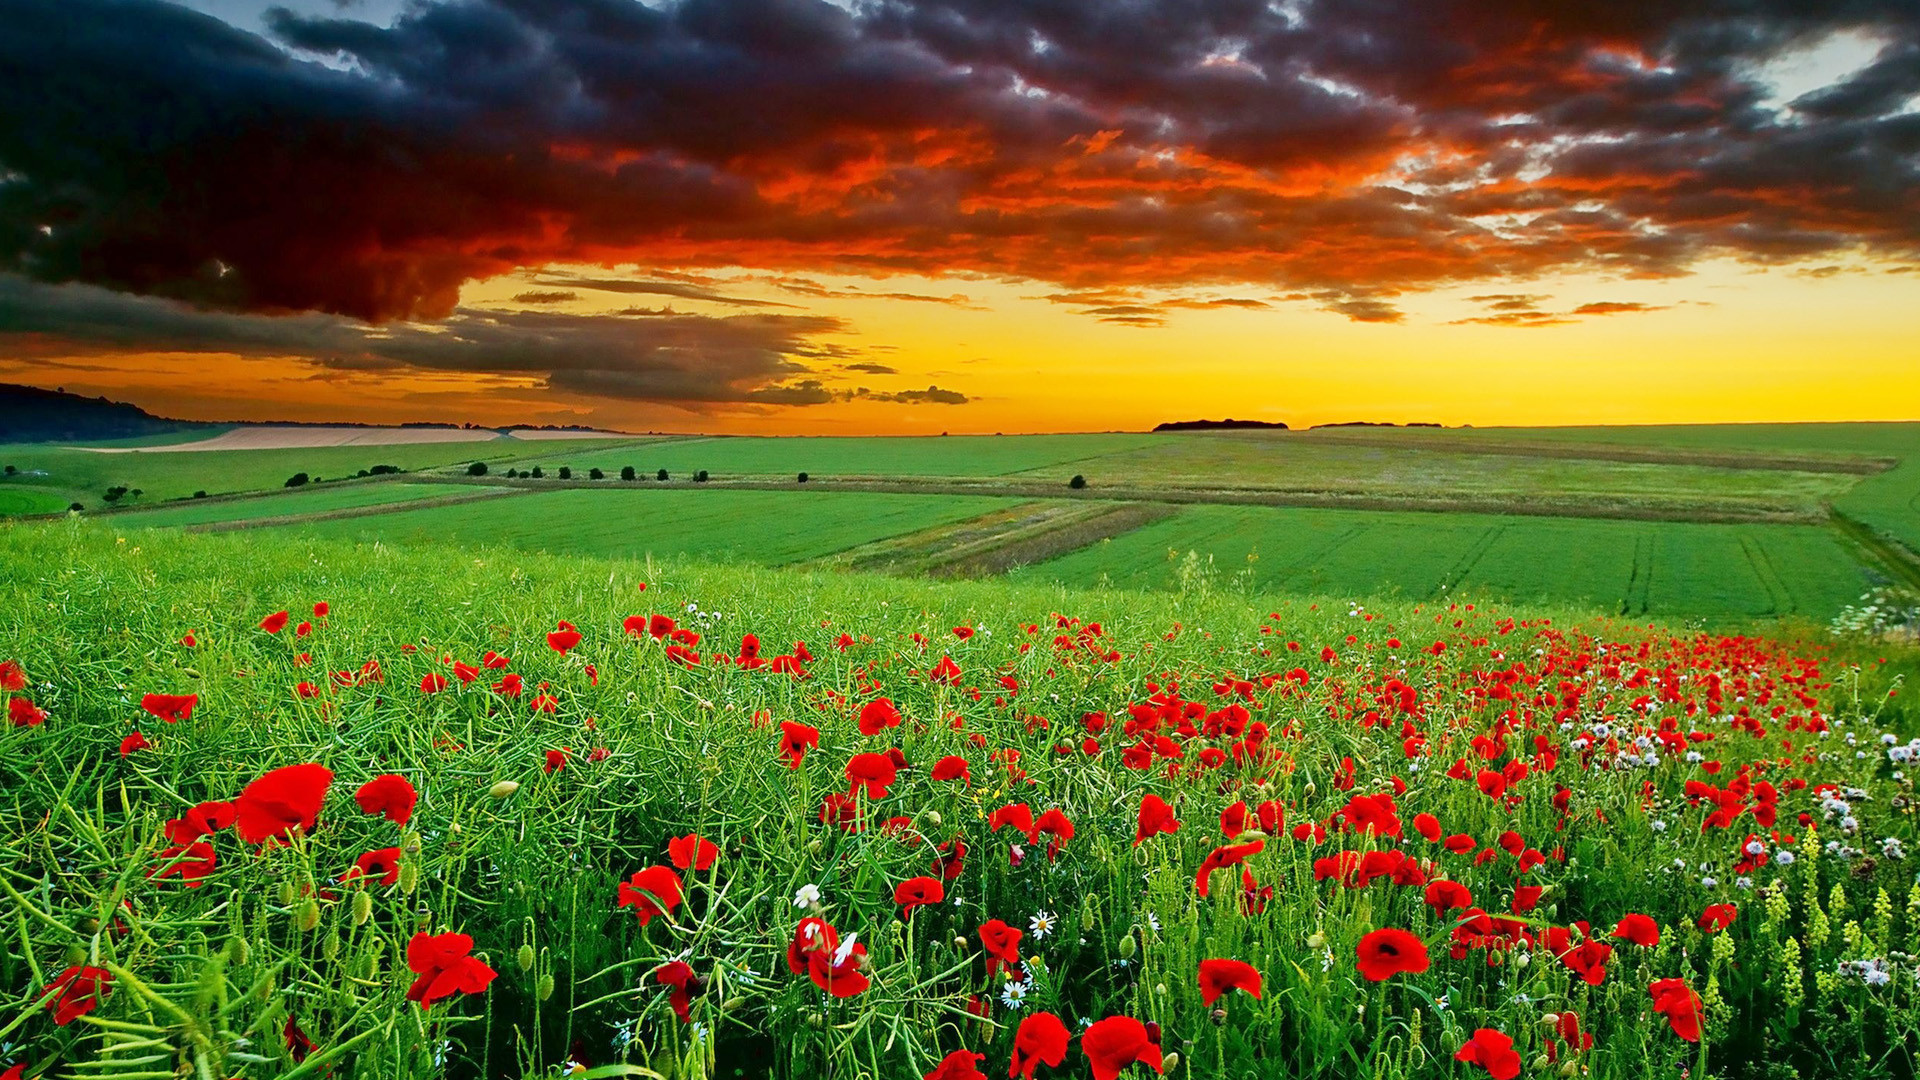 1920x1080  Full HD Nature Wallpapers 1080p Desktop in Green Landscape with  Flowers | HD Wallpapers |